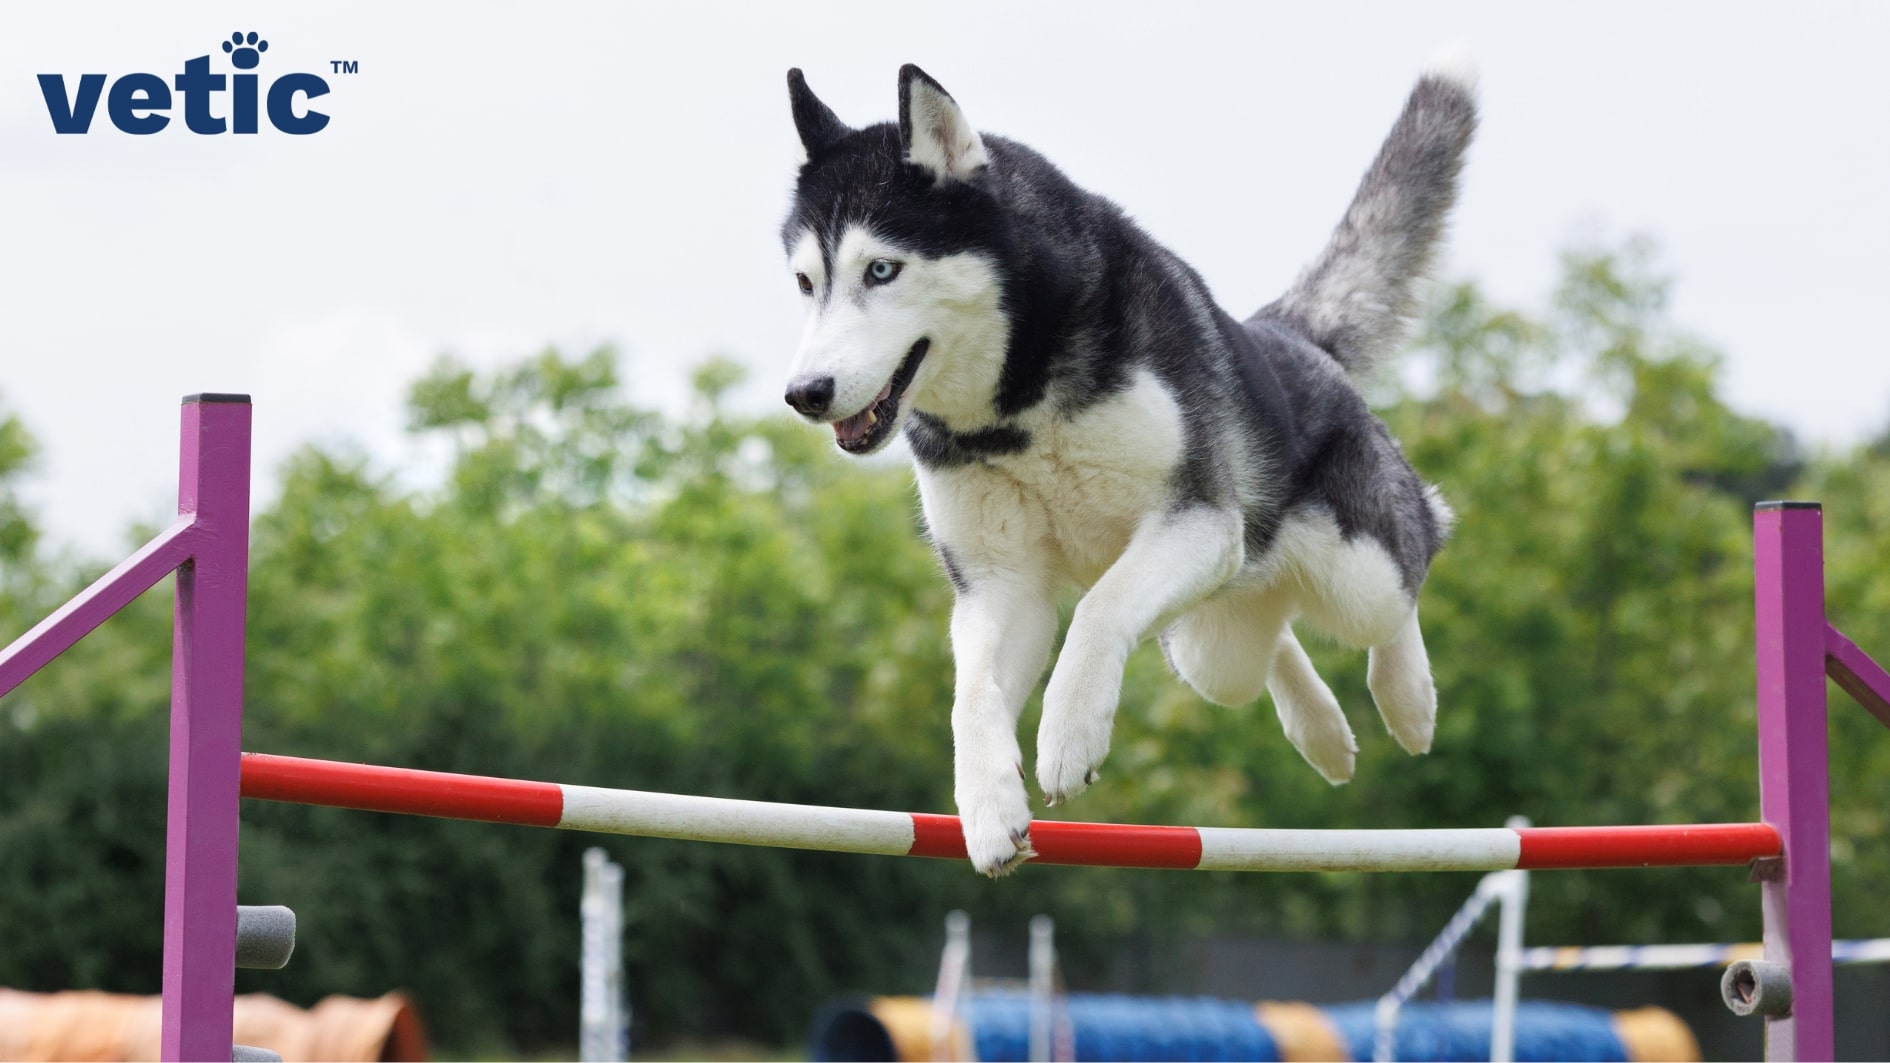 A husky with blue eyes is jumping over an obstacle most likely at a dog show. Huskies in India require cool environments, but they do require tons of exercise to stay fit.